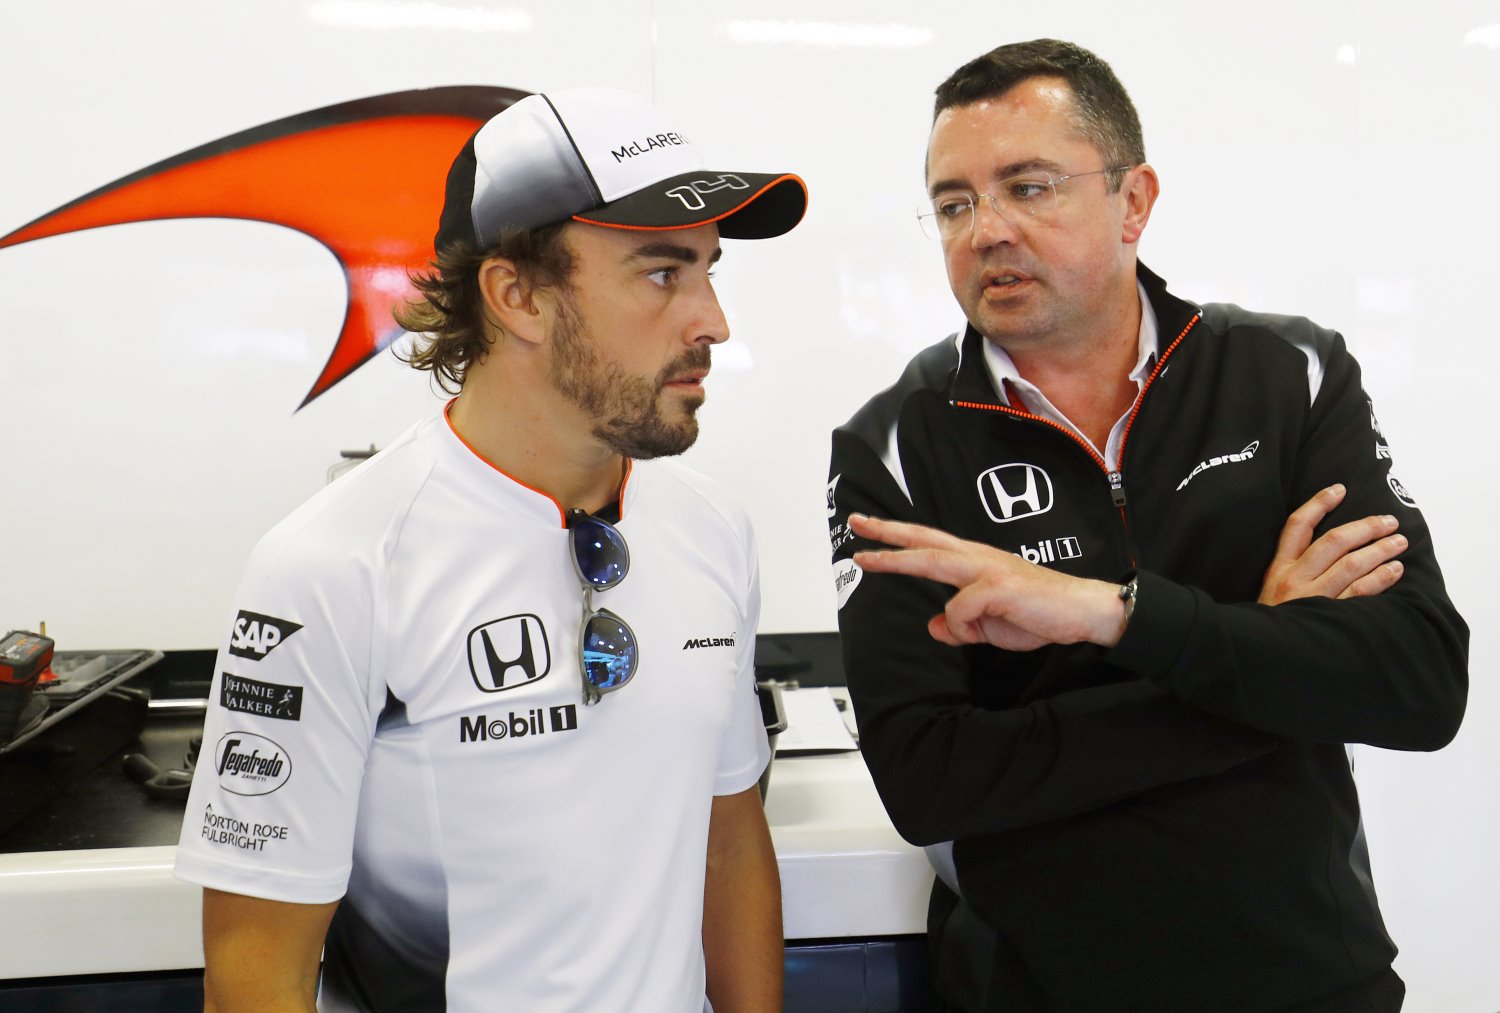 Alonso tells Boullier I need more power